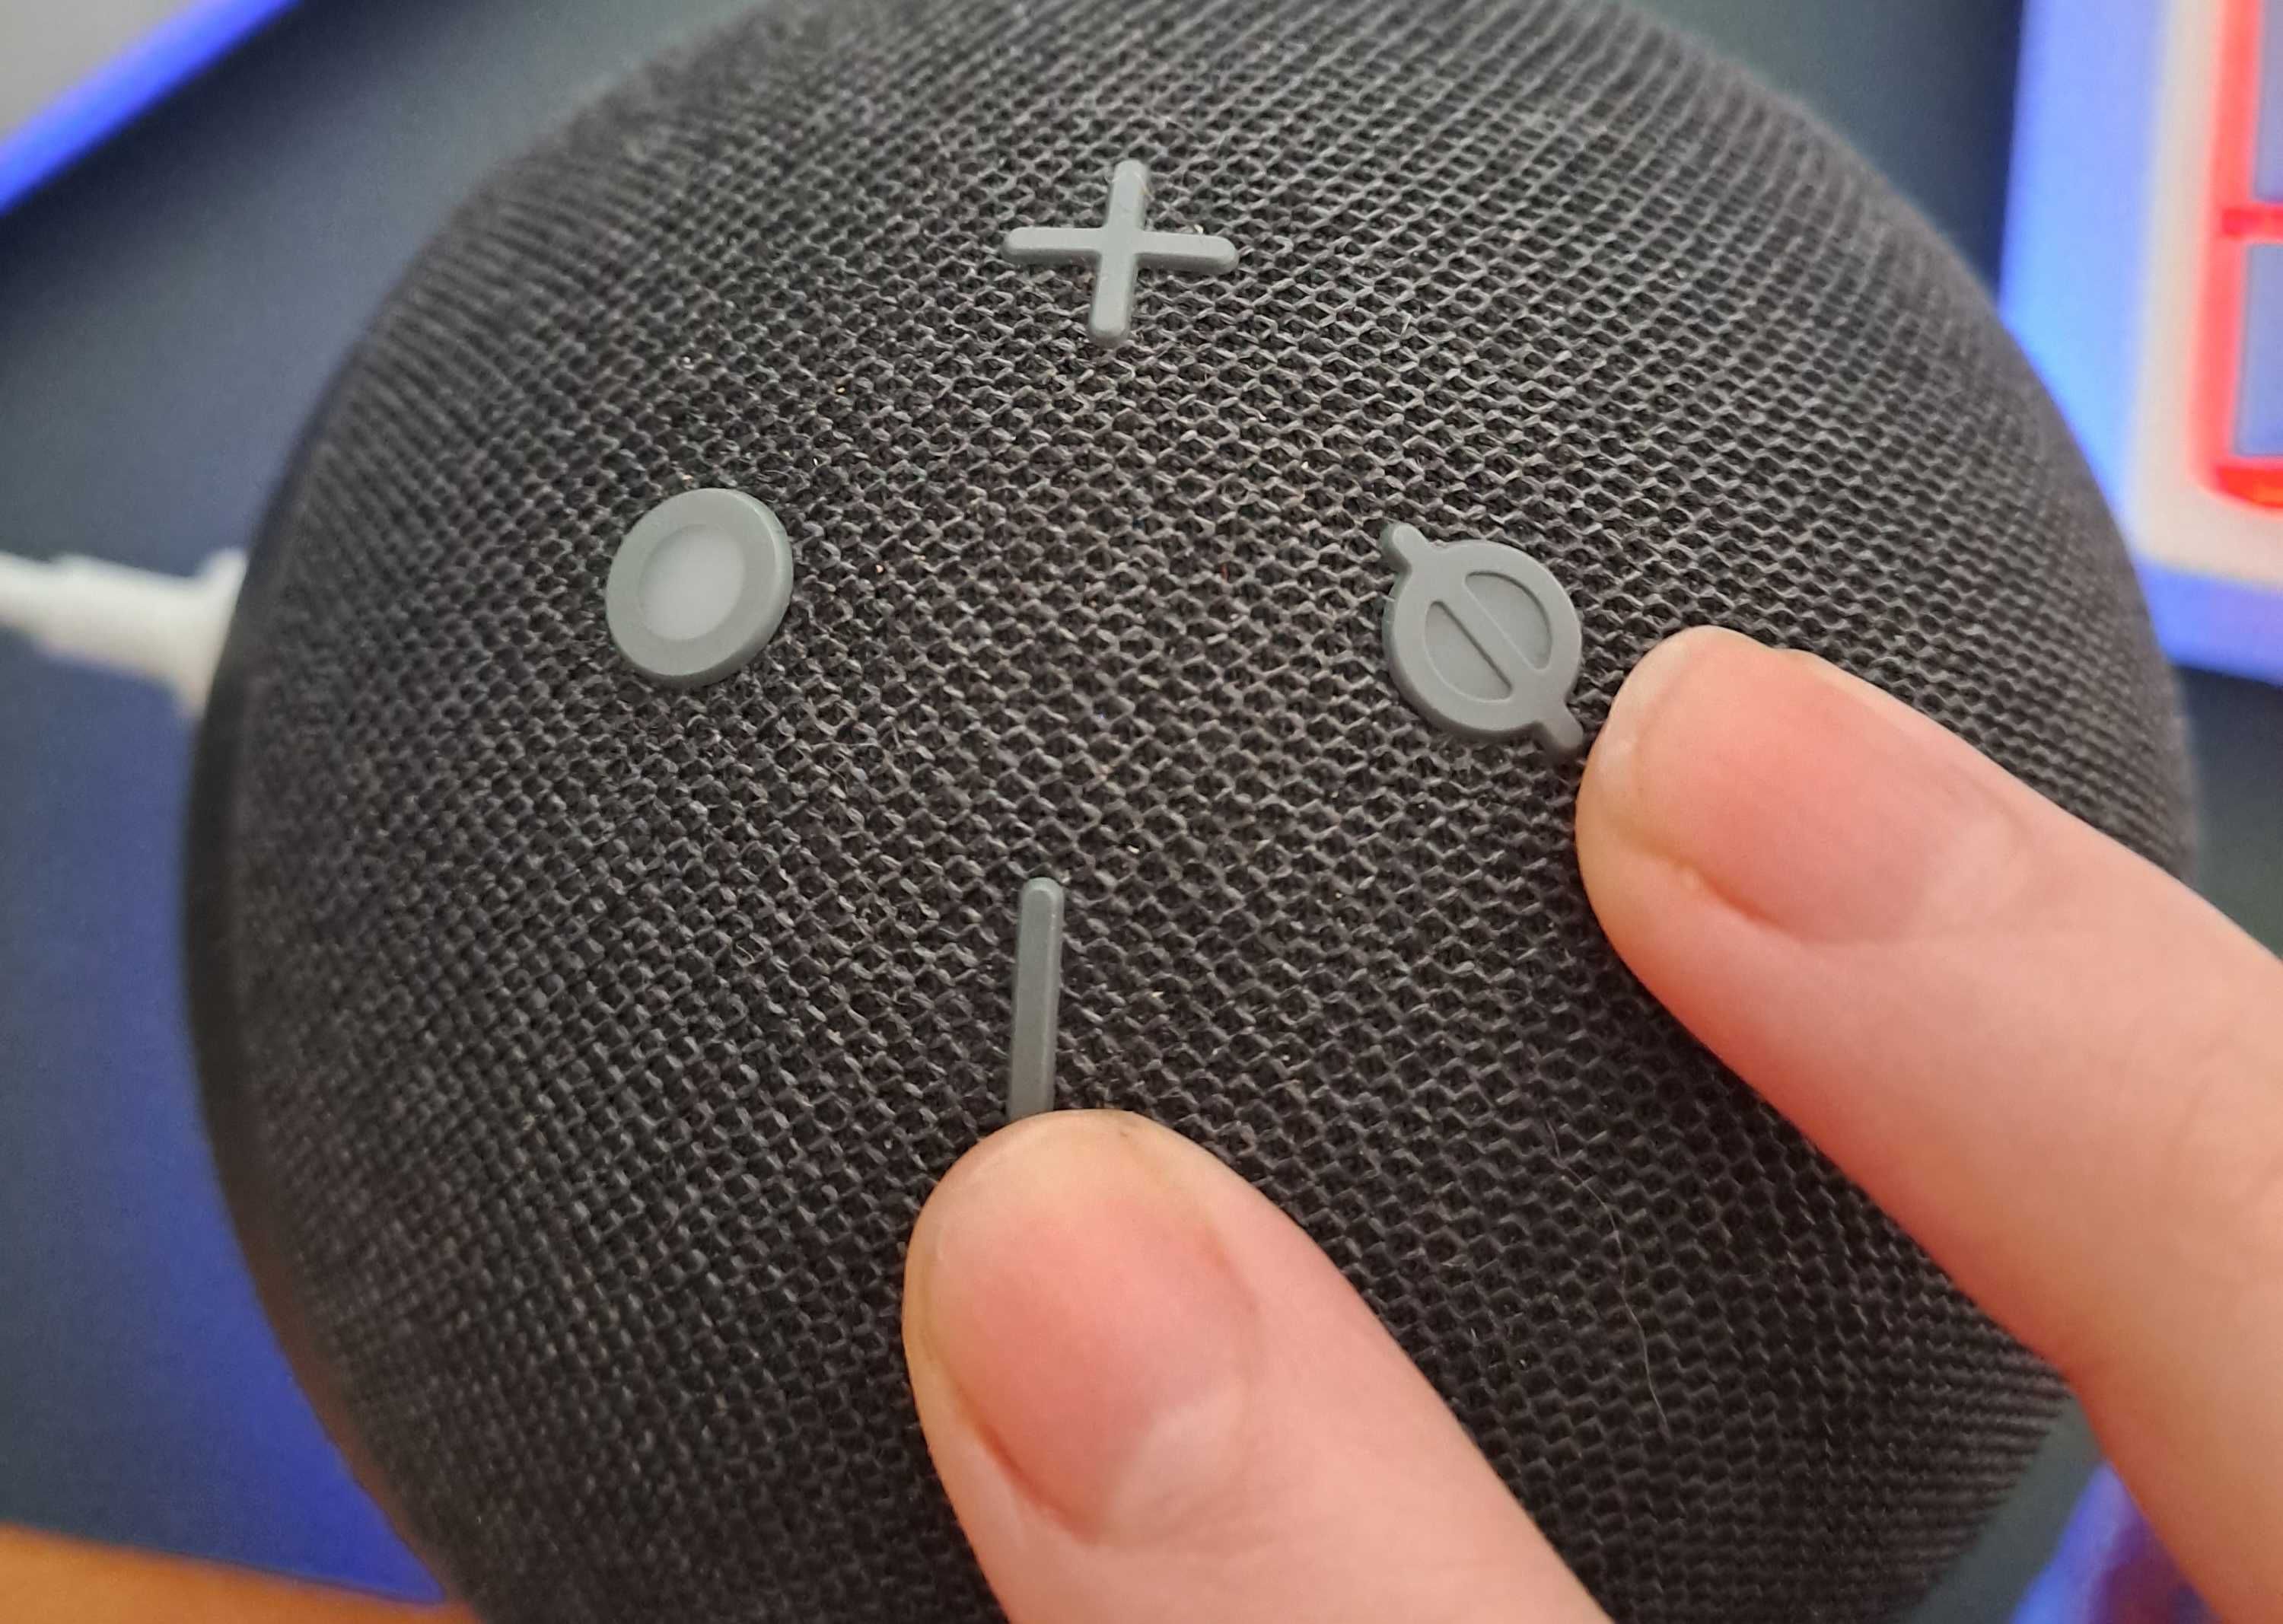 close up shot of Amazon Echo buttons with fingers pointing to volume down and microphone off